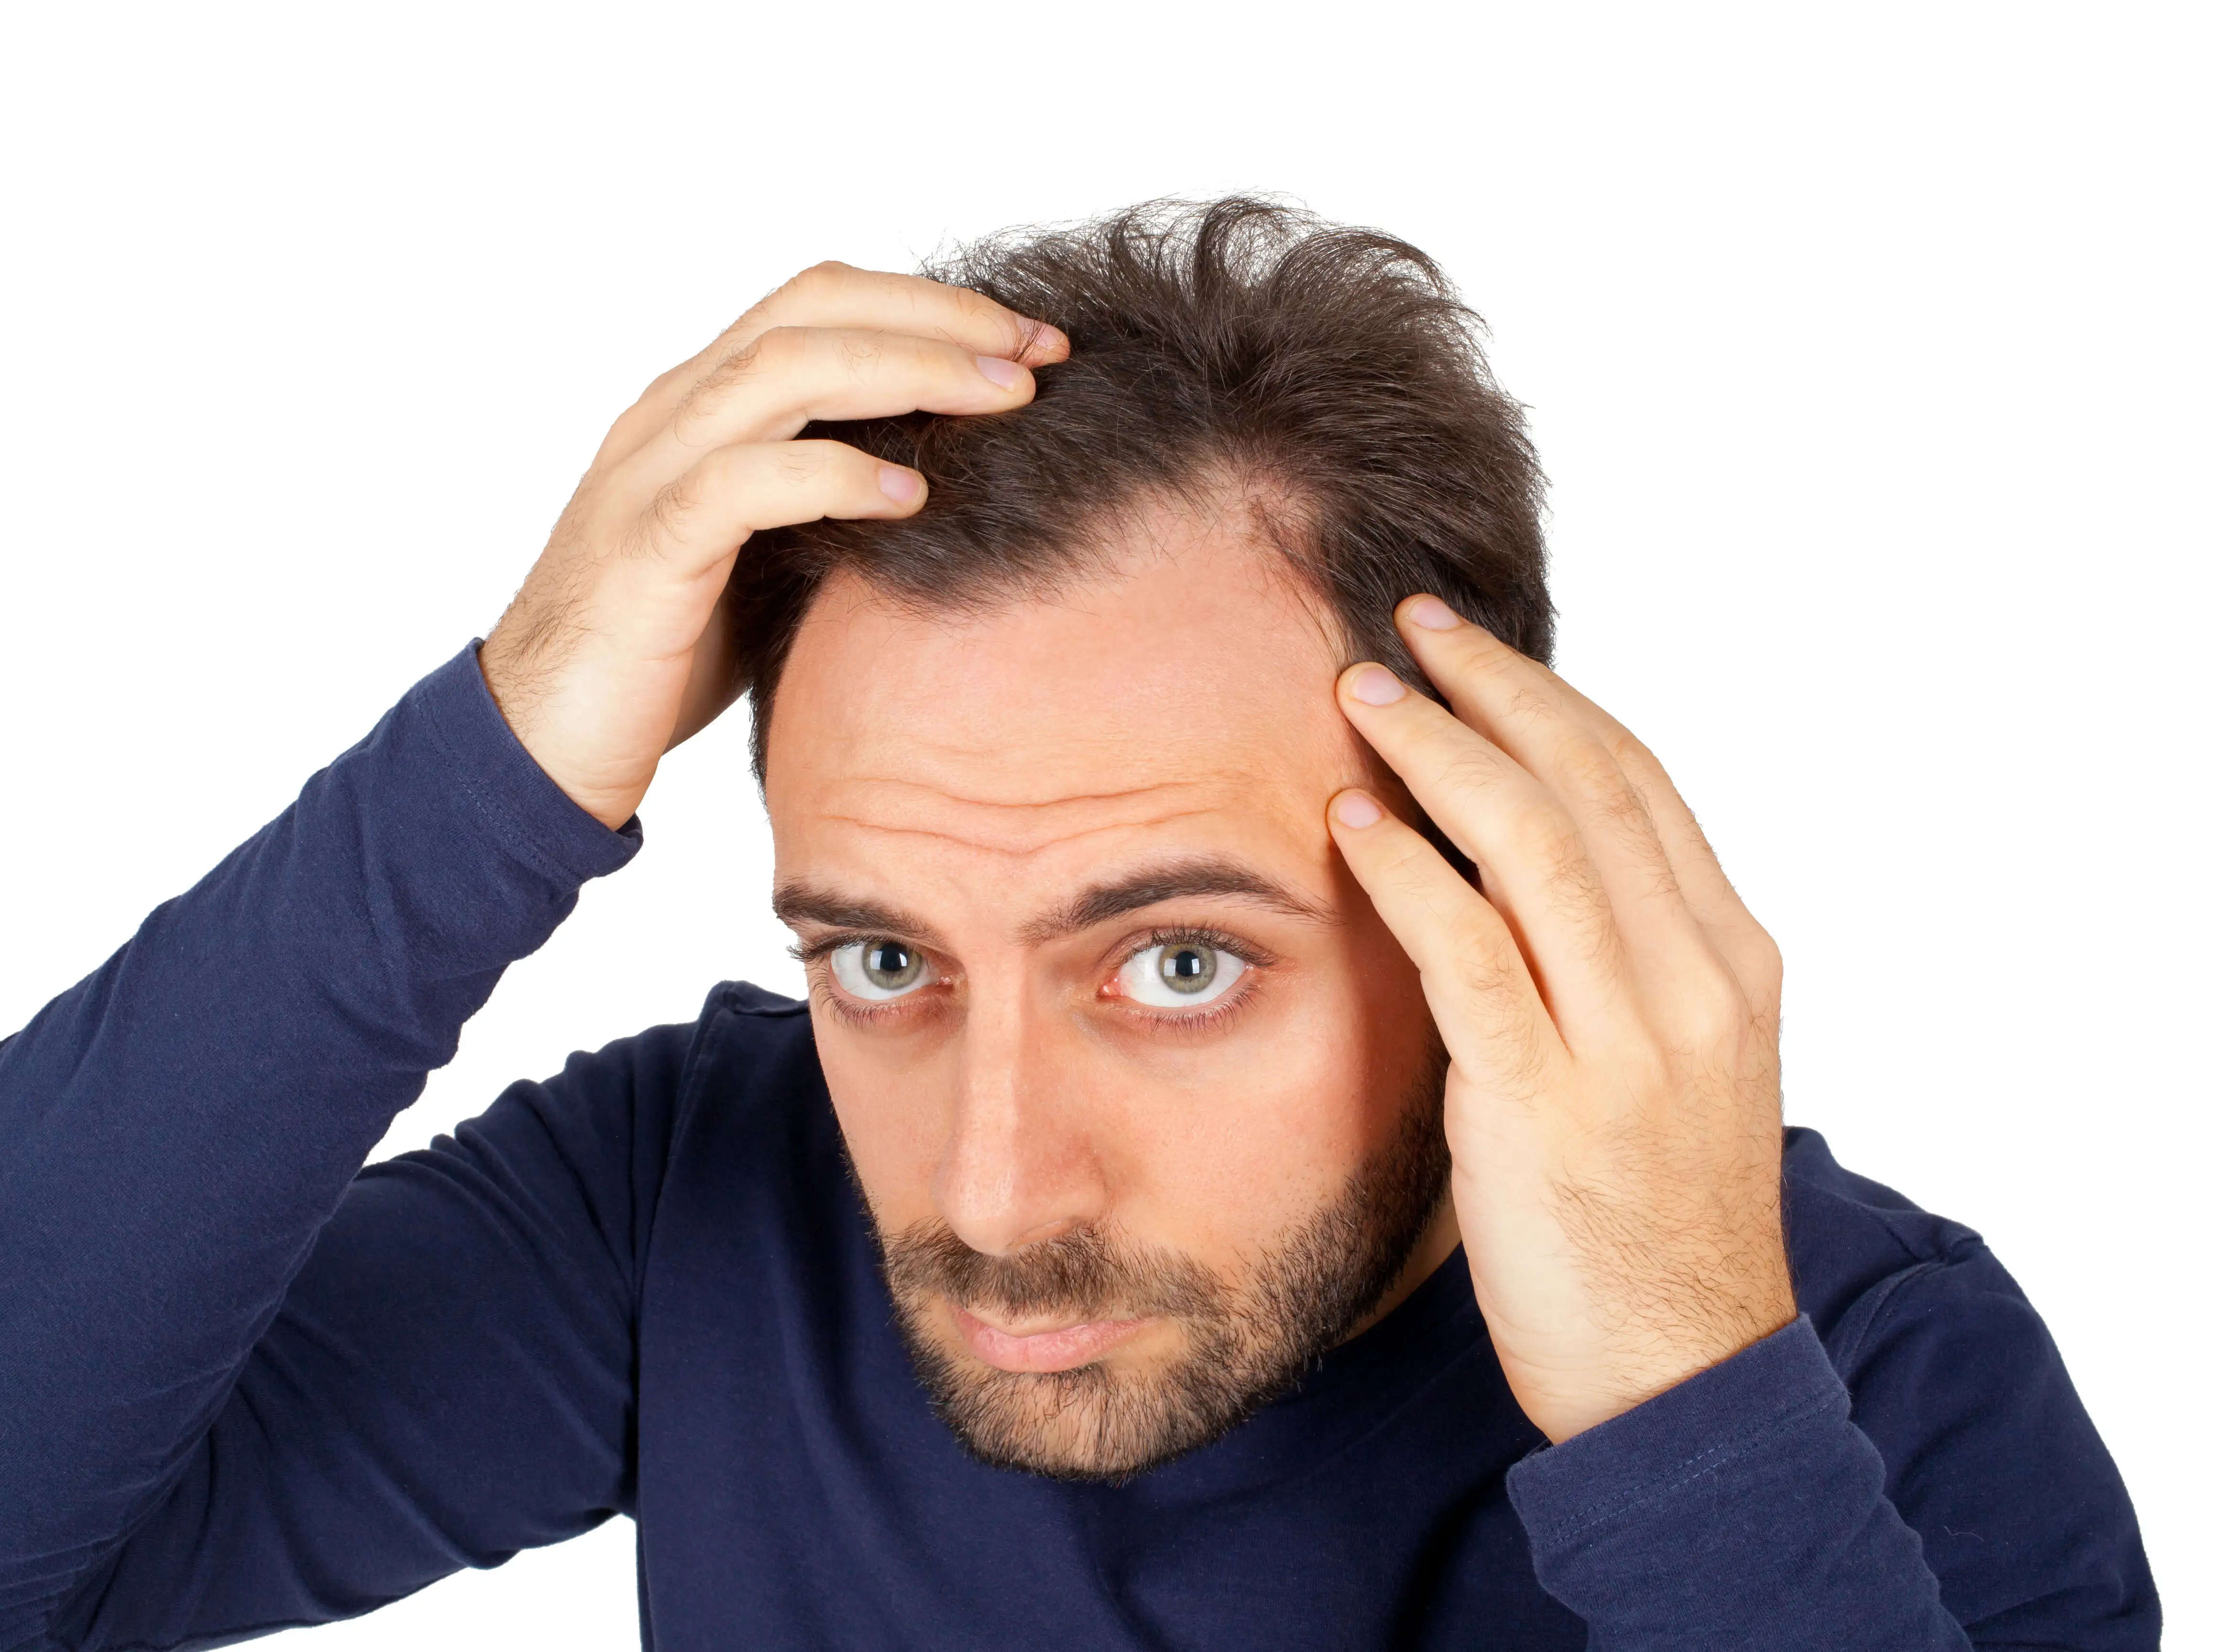 What is Finasteride and how does it help to reverse hair loss in men?